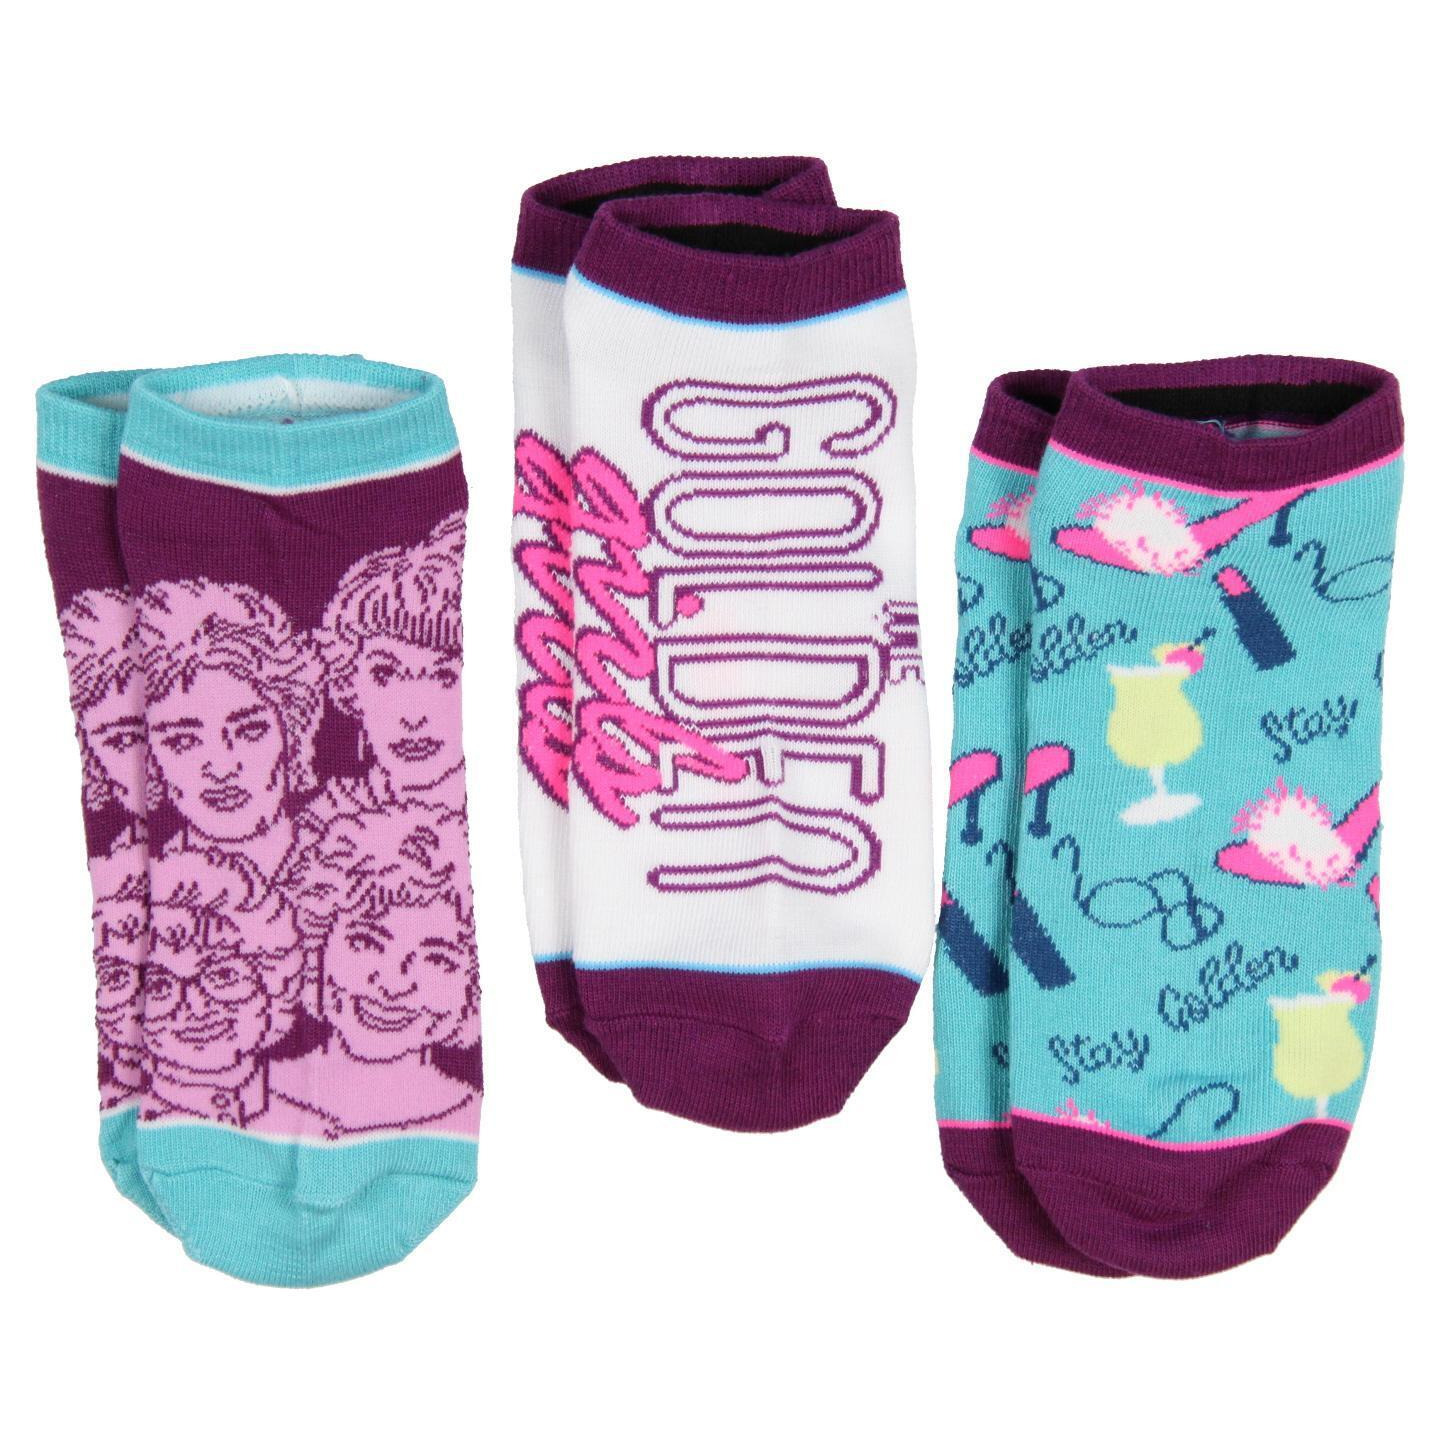 The Golden Girls Stay Golden 3 Pair Character Ankle No Show Socks